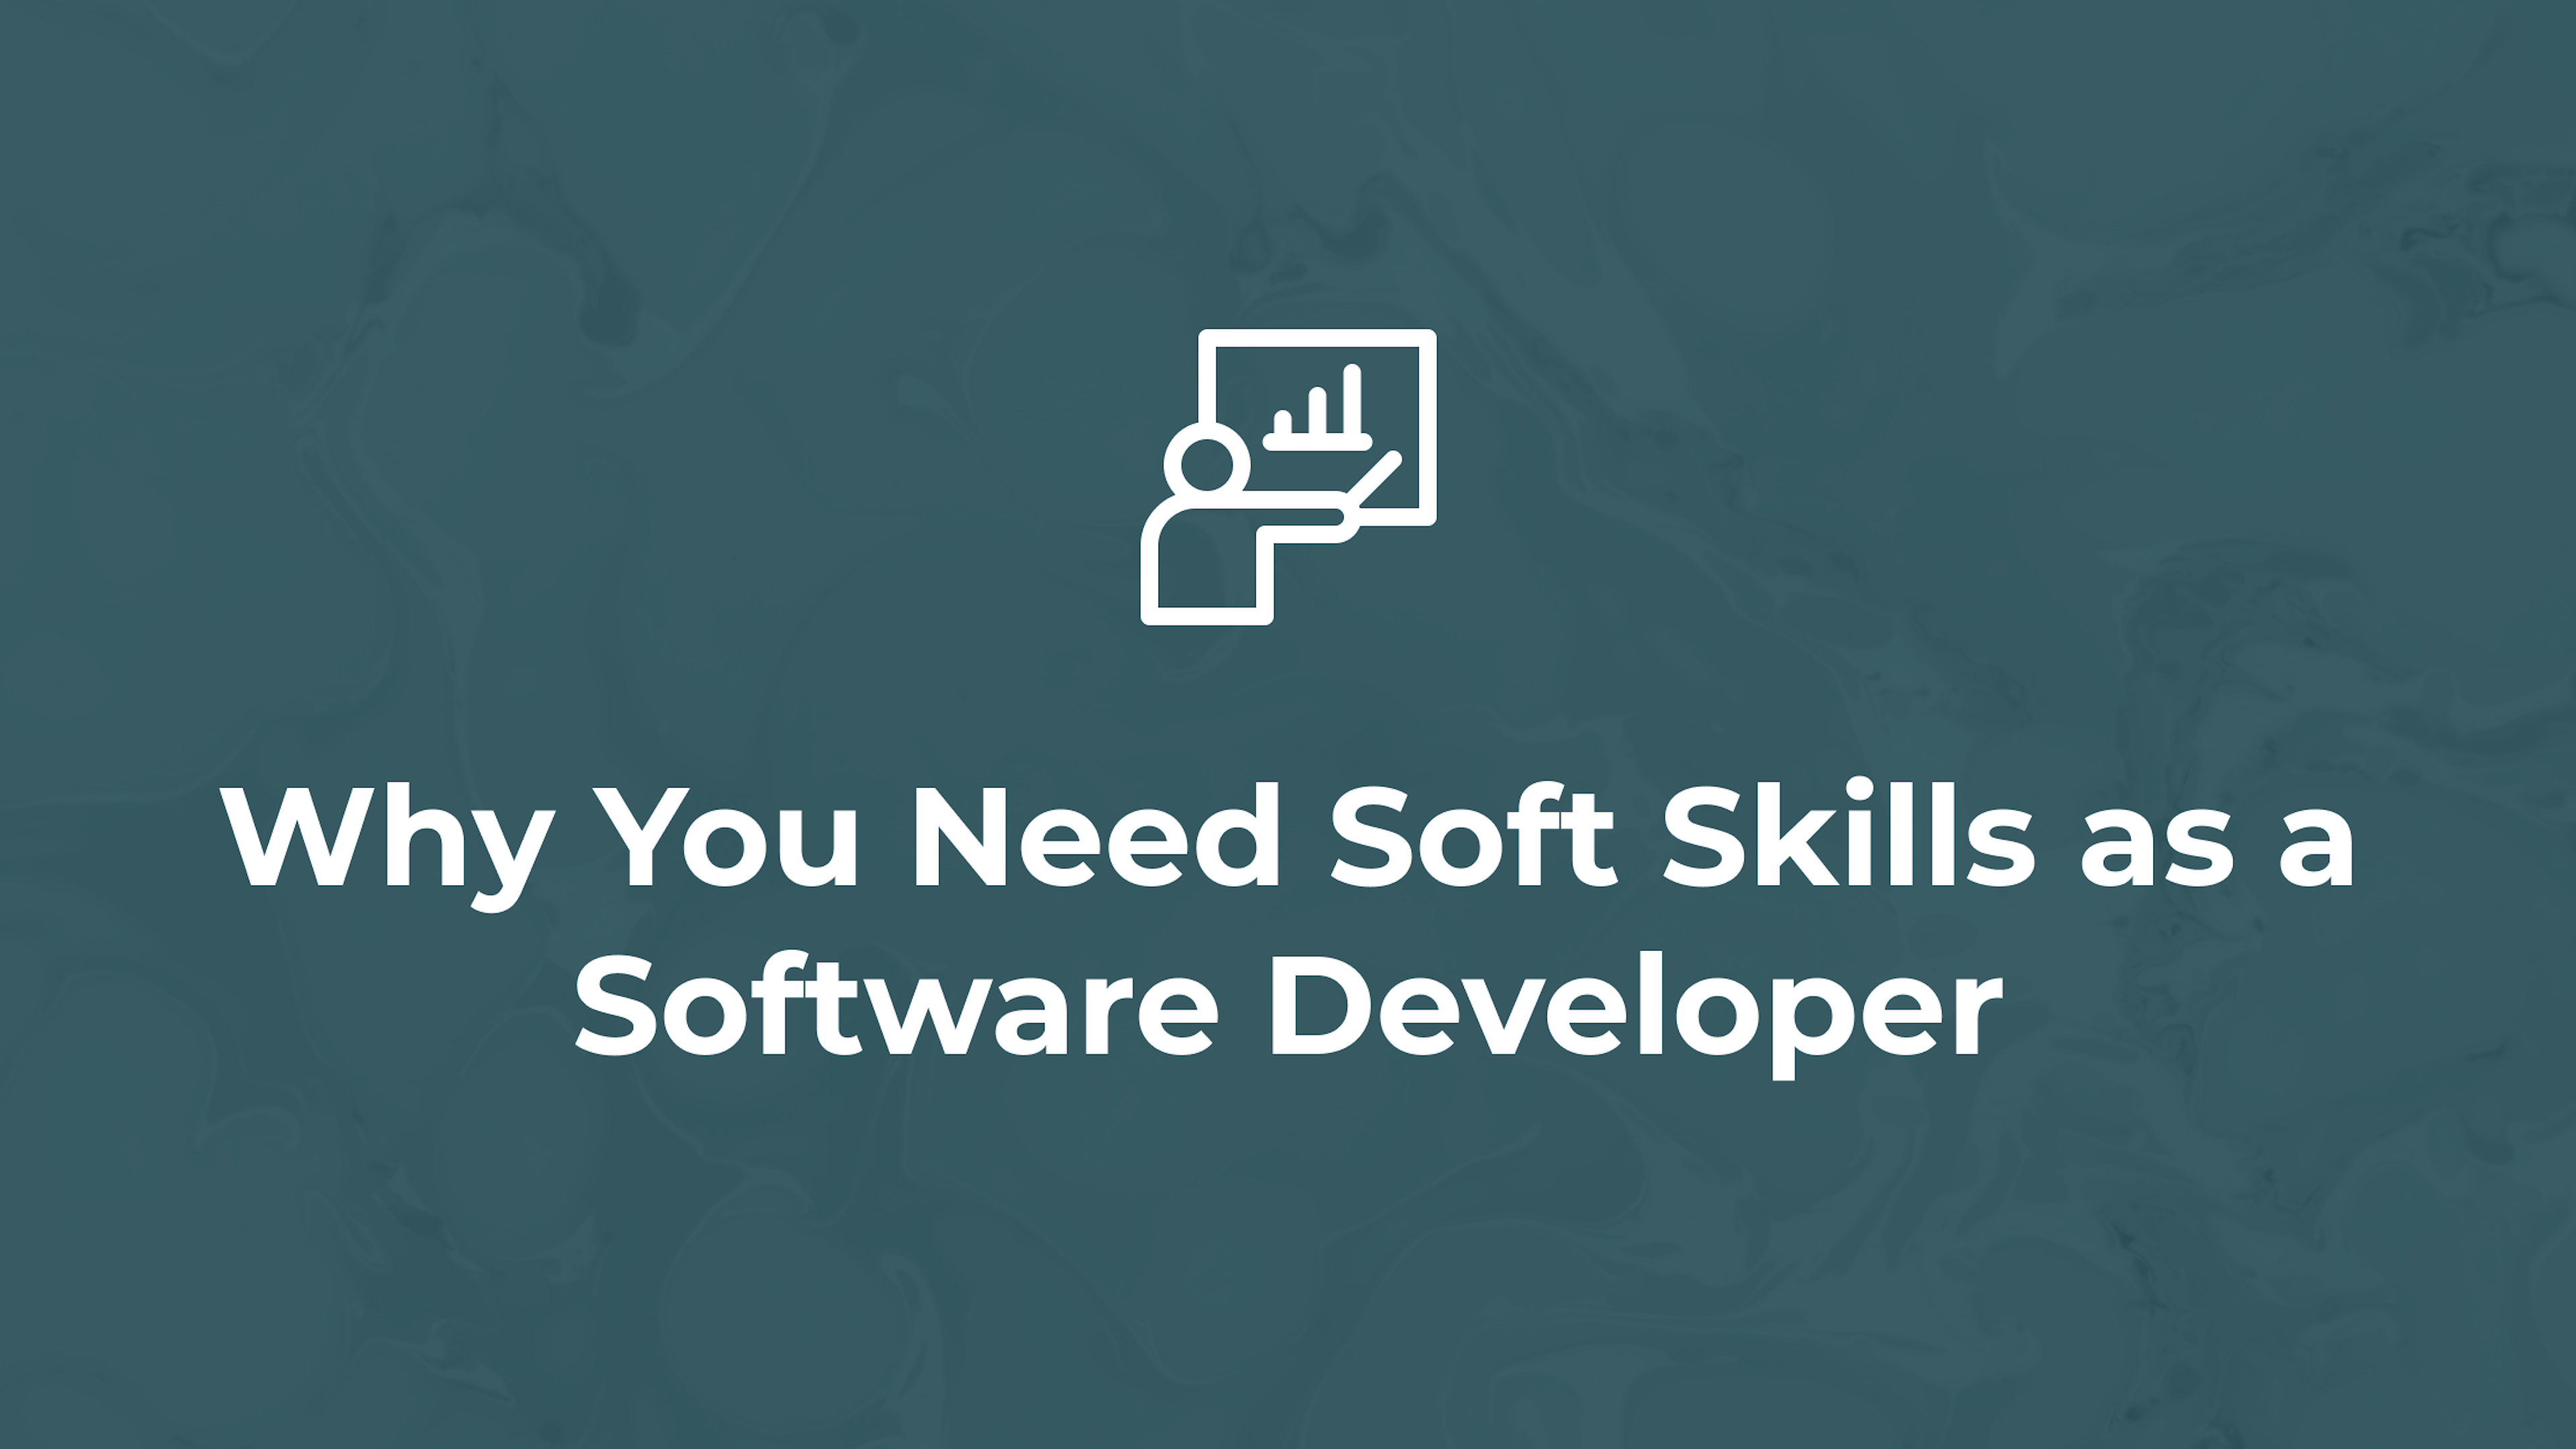 Why You Need Soft Skills as a Software Developer